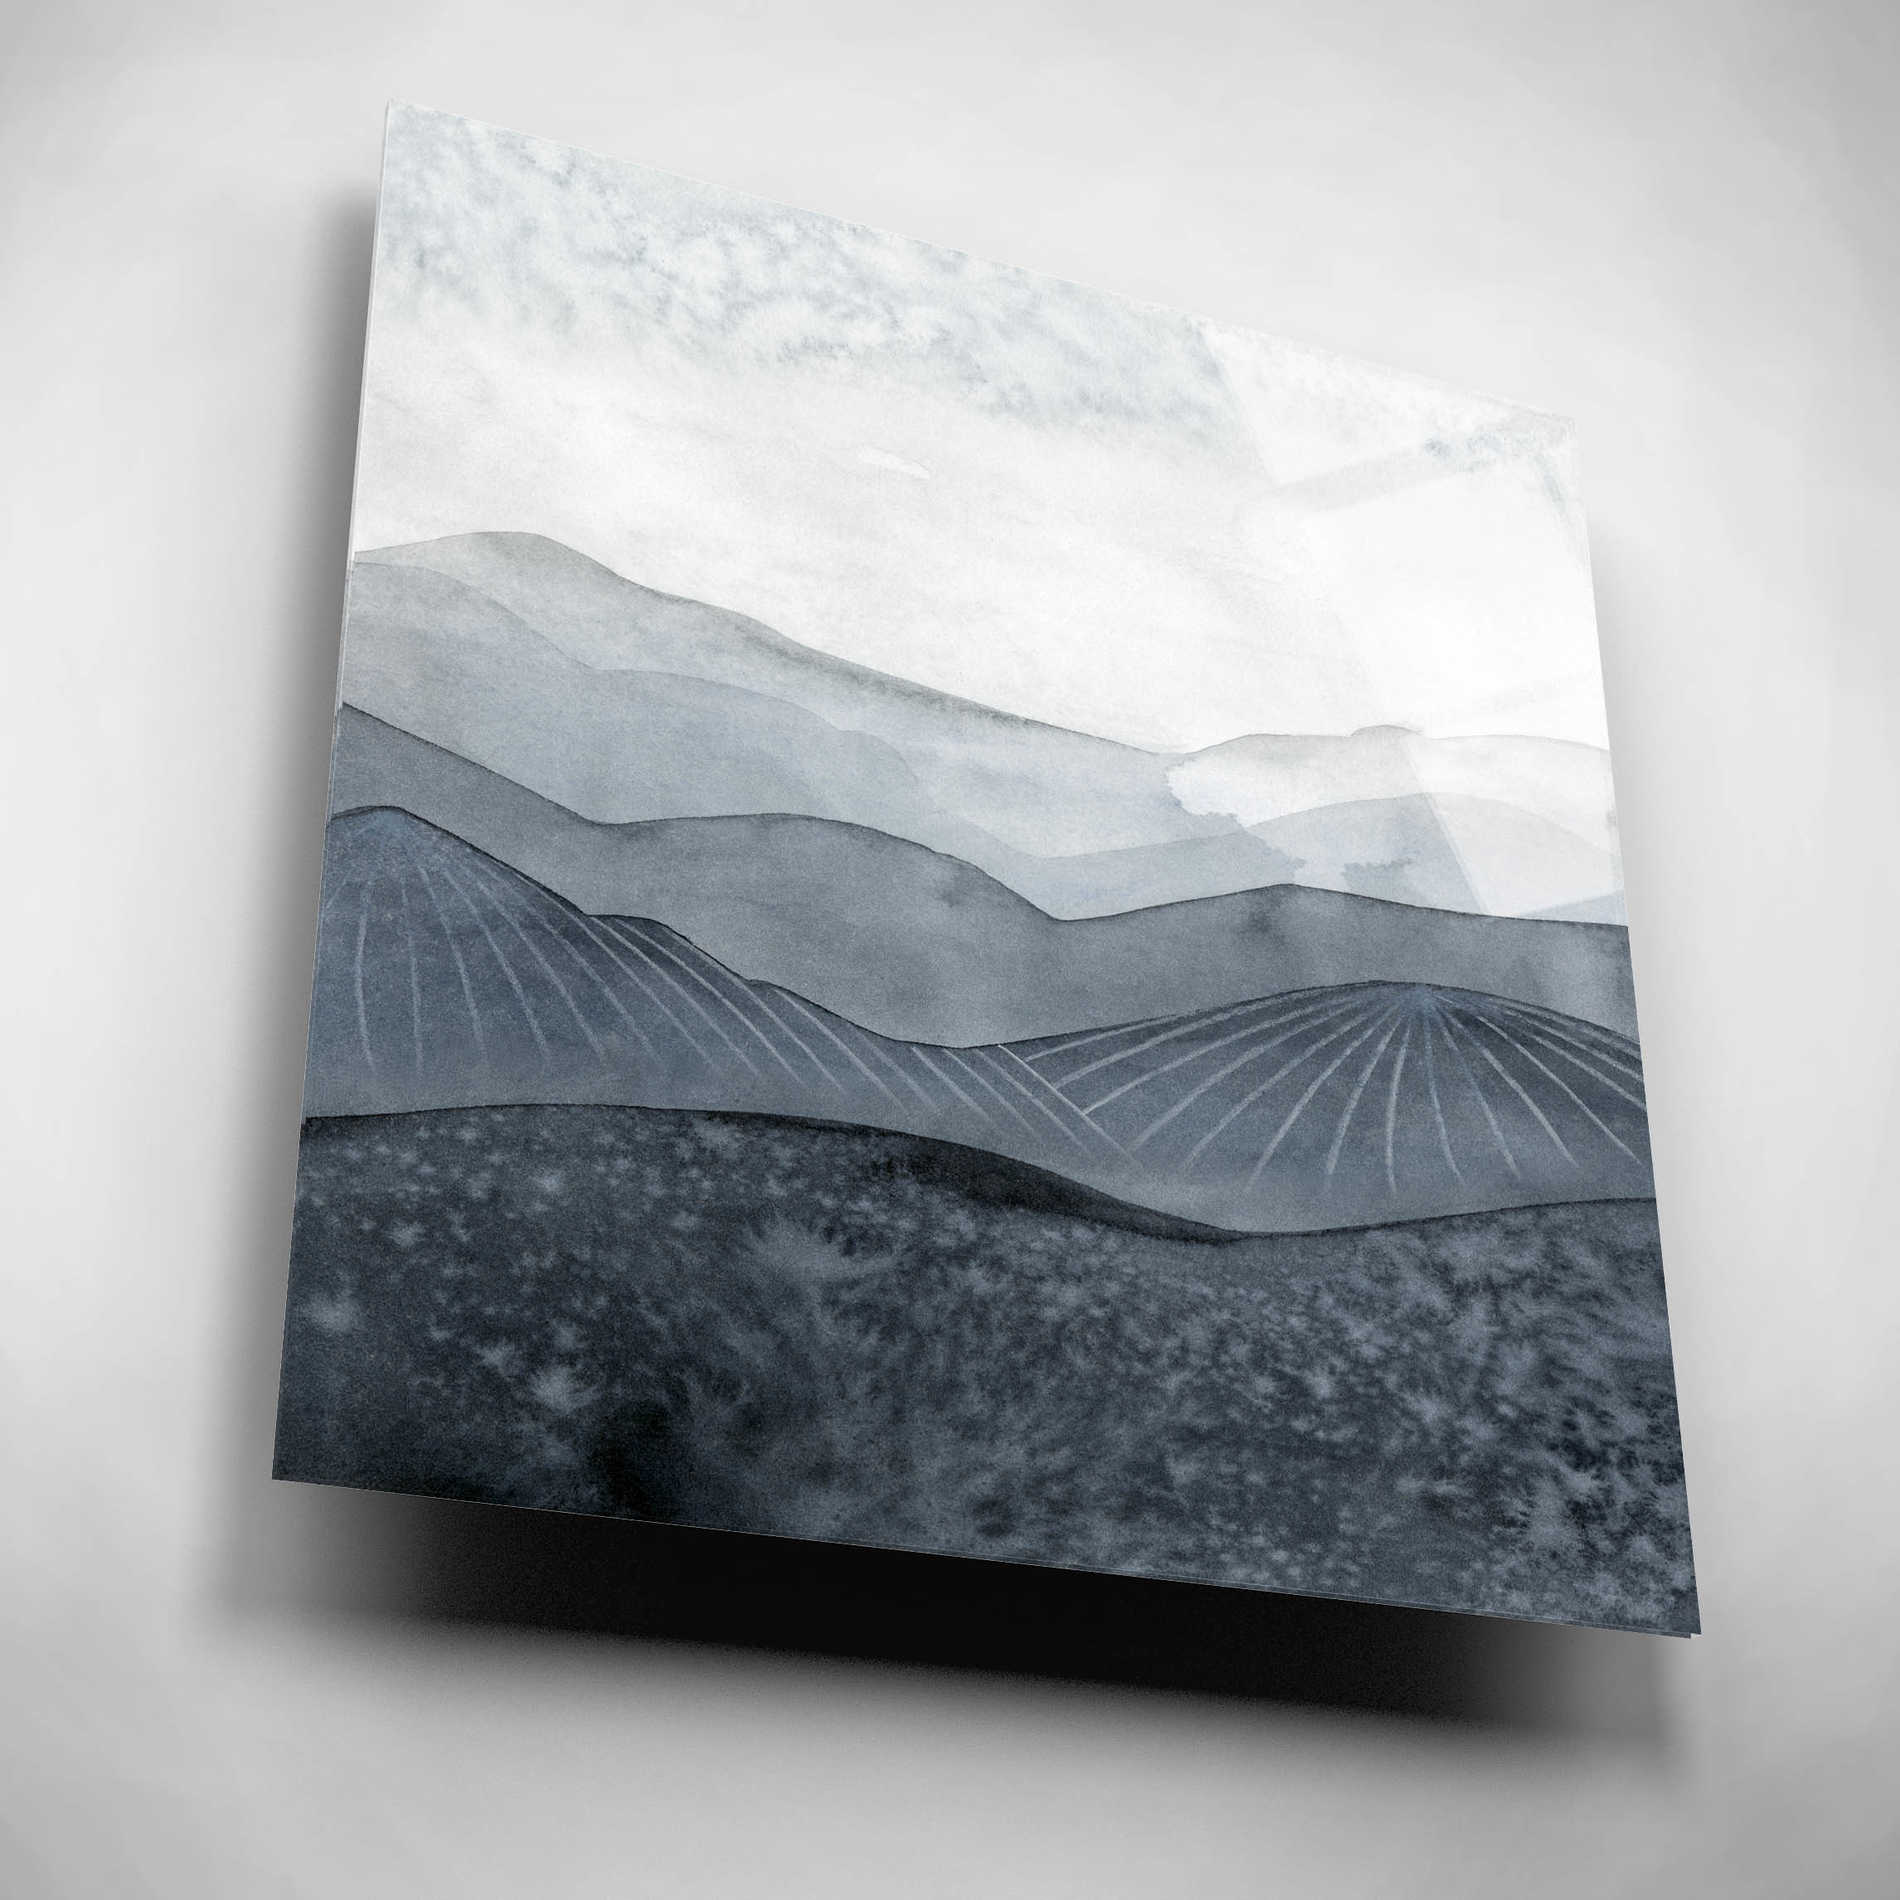 Epic Art 'Blustering Valley I' by Grace Popp, Acrylic Wall Glass,12x12